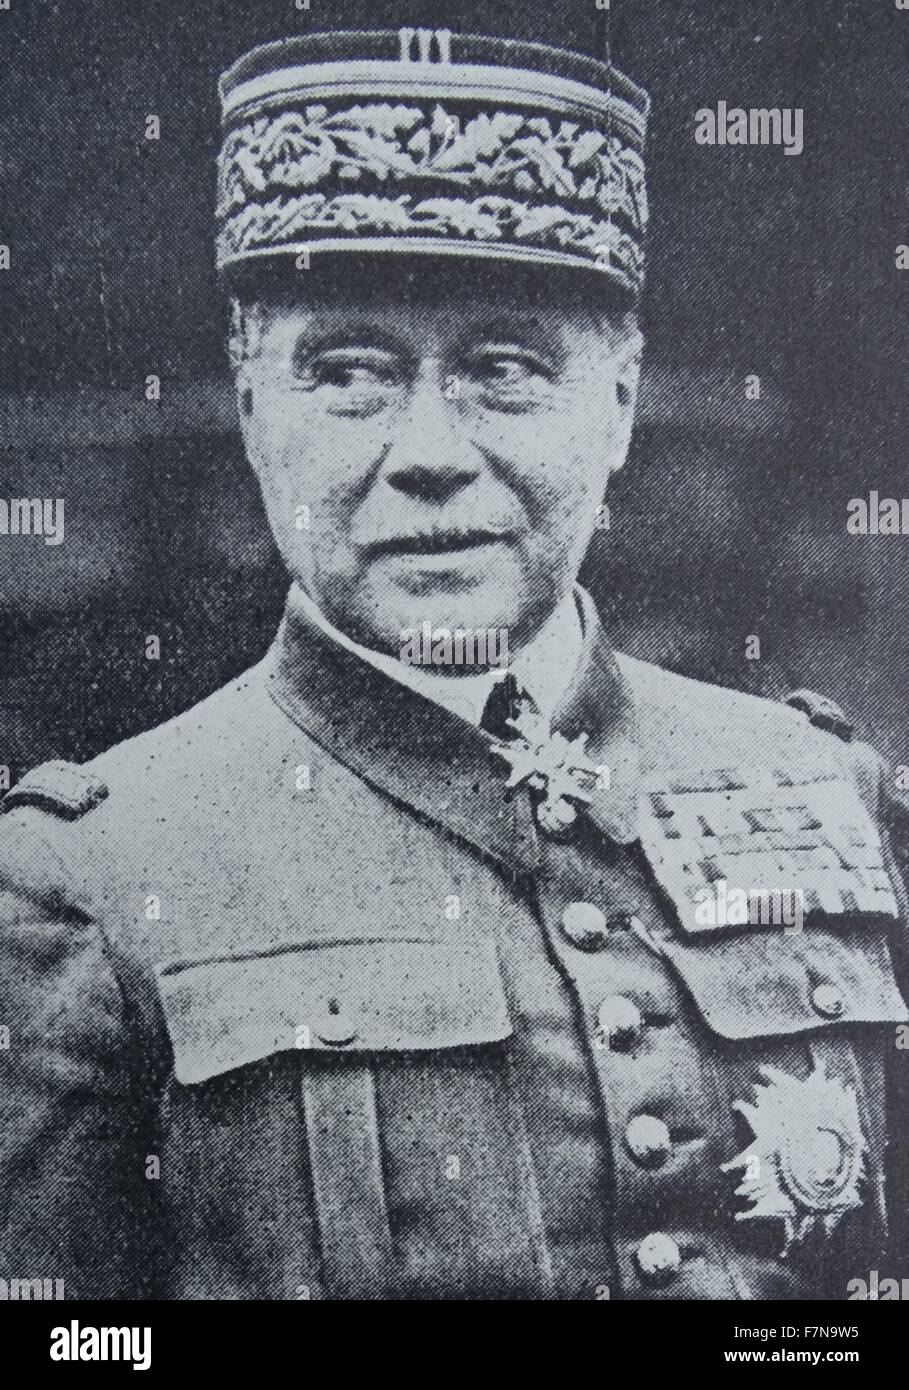 Photograph of General Maurice Gamelin (1872-1958) a French general and Commander-in-Chief of the French forces in World War II. Dated 1939 Stock Photo